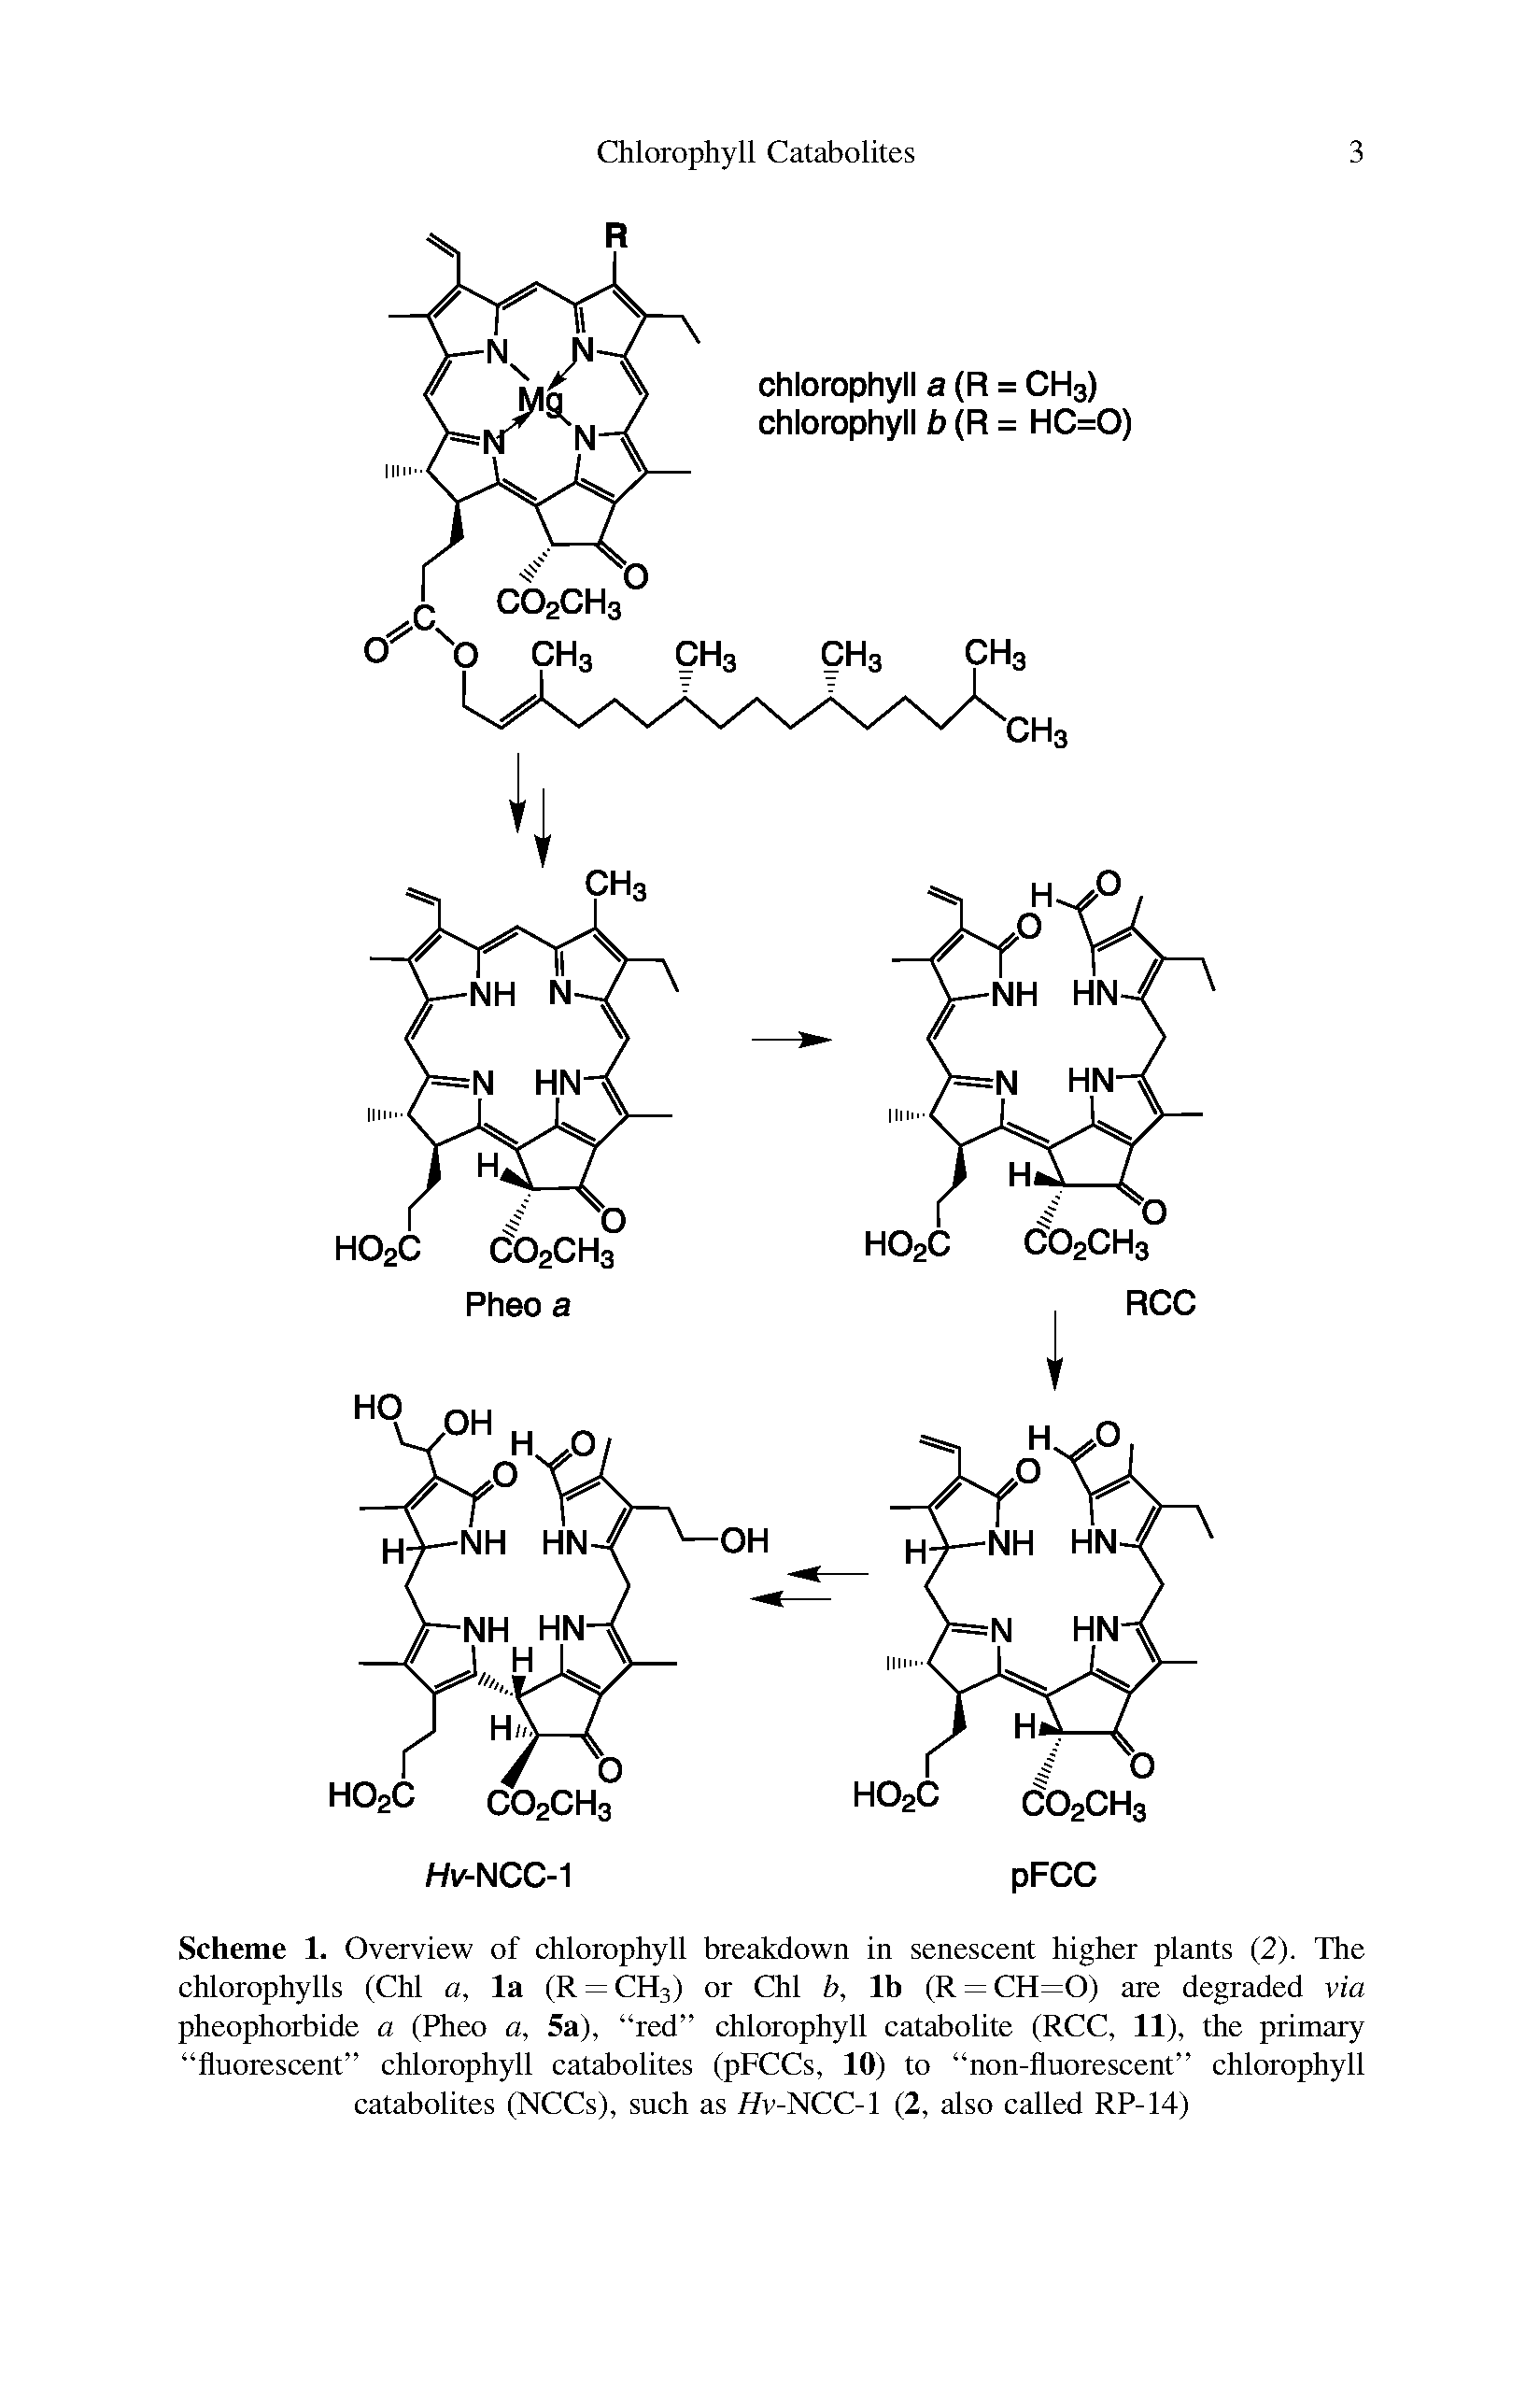 Scheme 1. Overview of chlorophyll breakdown in senescent higher plants (2). The chlorophylls (Chi a, la (R = CH3) or Chi b, lb (R = CH=0) are degraded via pheophorbide a (Pheo a, 5a), red chlorophyll catabolite (RCC, 11), the primary fluorescent chlorophyll catabolites (pFCCs, 10) to non-fluorescent chlorophyll catabolites (NCCs), such as //v-NCC-1 (2, also called RP-14)...